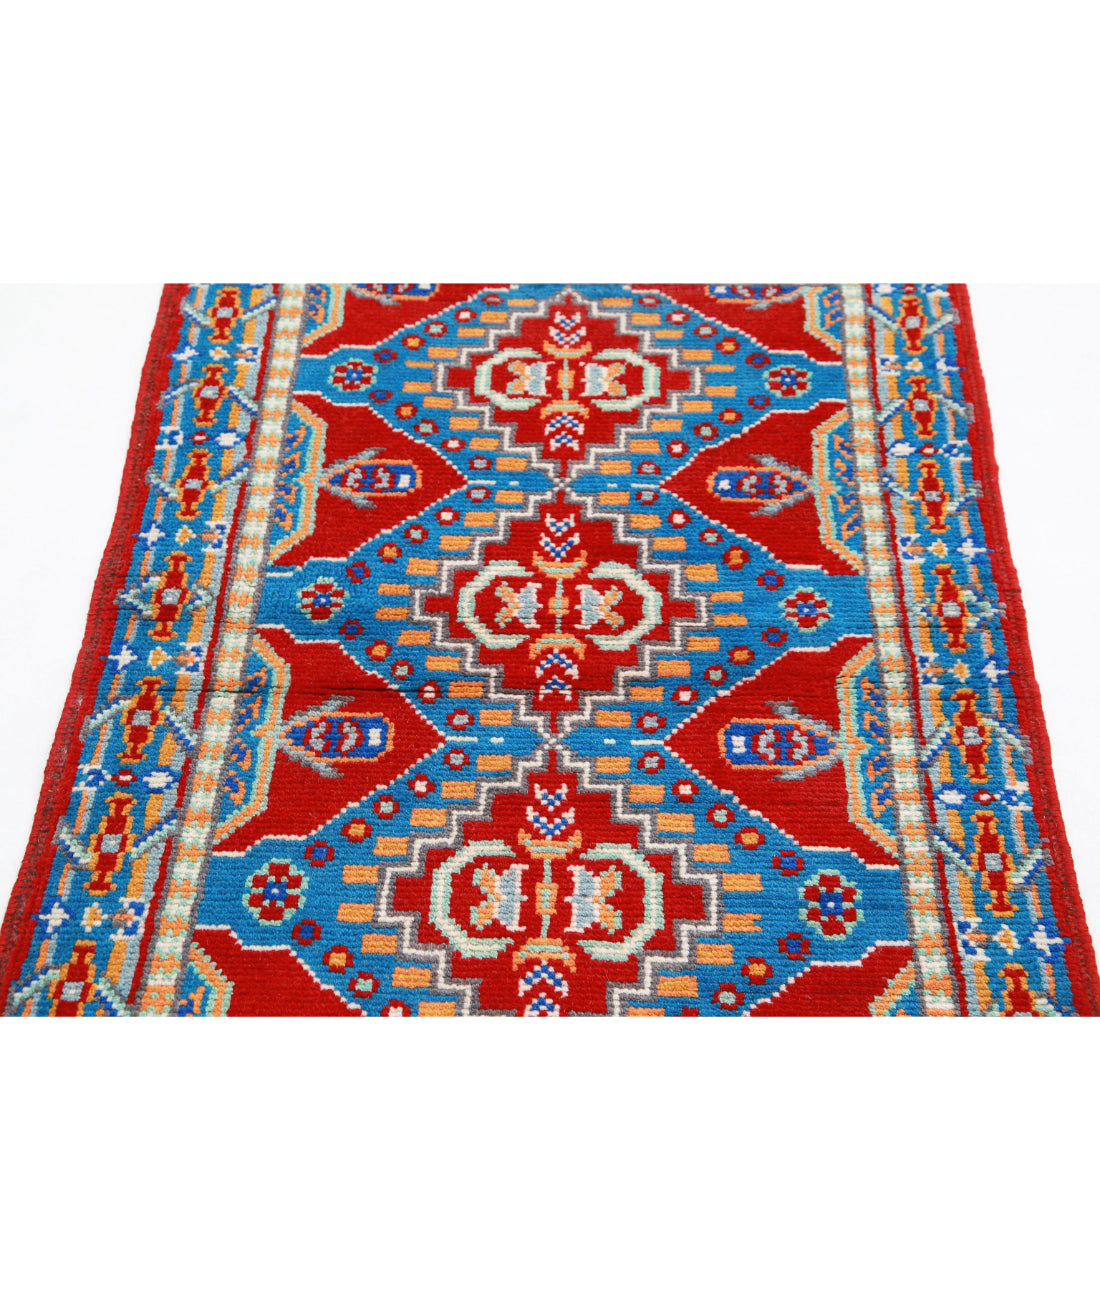 Revival 2'7'' X 4'0'' Hand-Knotted Wool Rug 2'7'' x 4'0'' (78 X 120) / Red / Blue